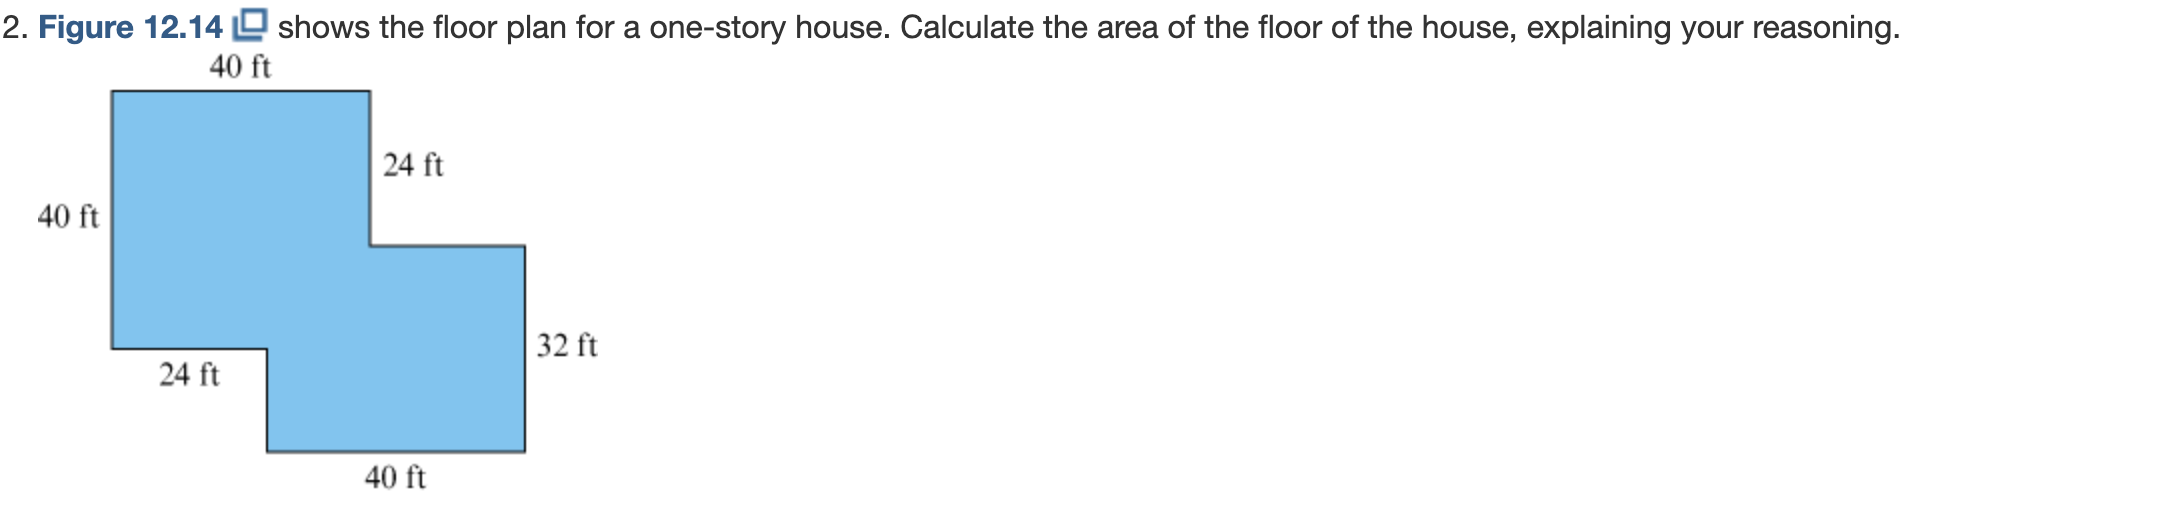 2. Figure 12.14D shows the floor plan for a one-story house. Calculate the area of the floor of the house, explaining your reasoning.
40 ft
| 24 ft
40 ft
32 ft
24 ft
40 ft
